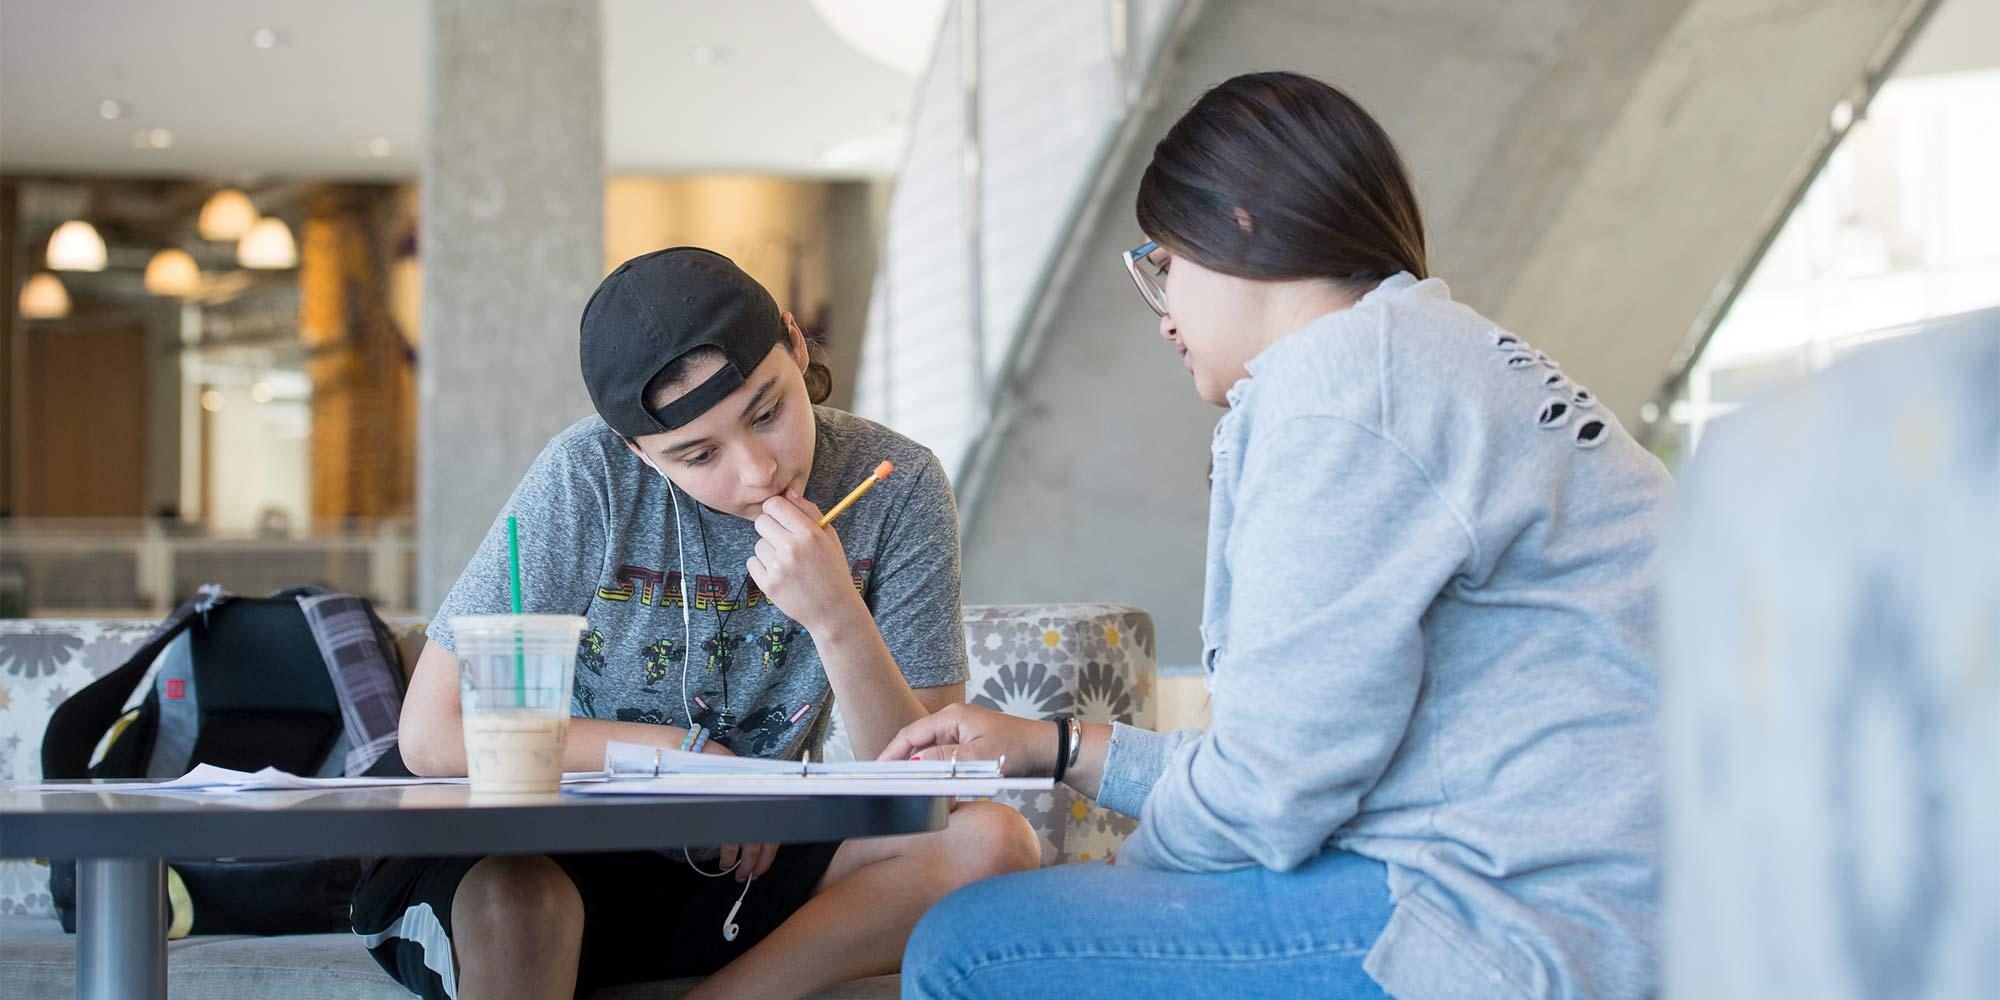 Students studying in Bawcom Union at .